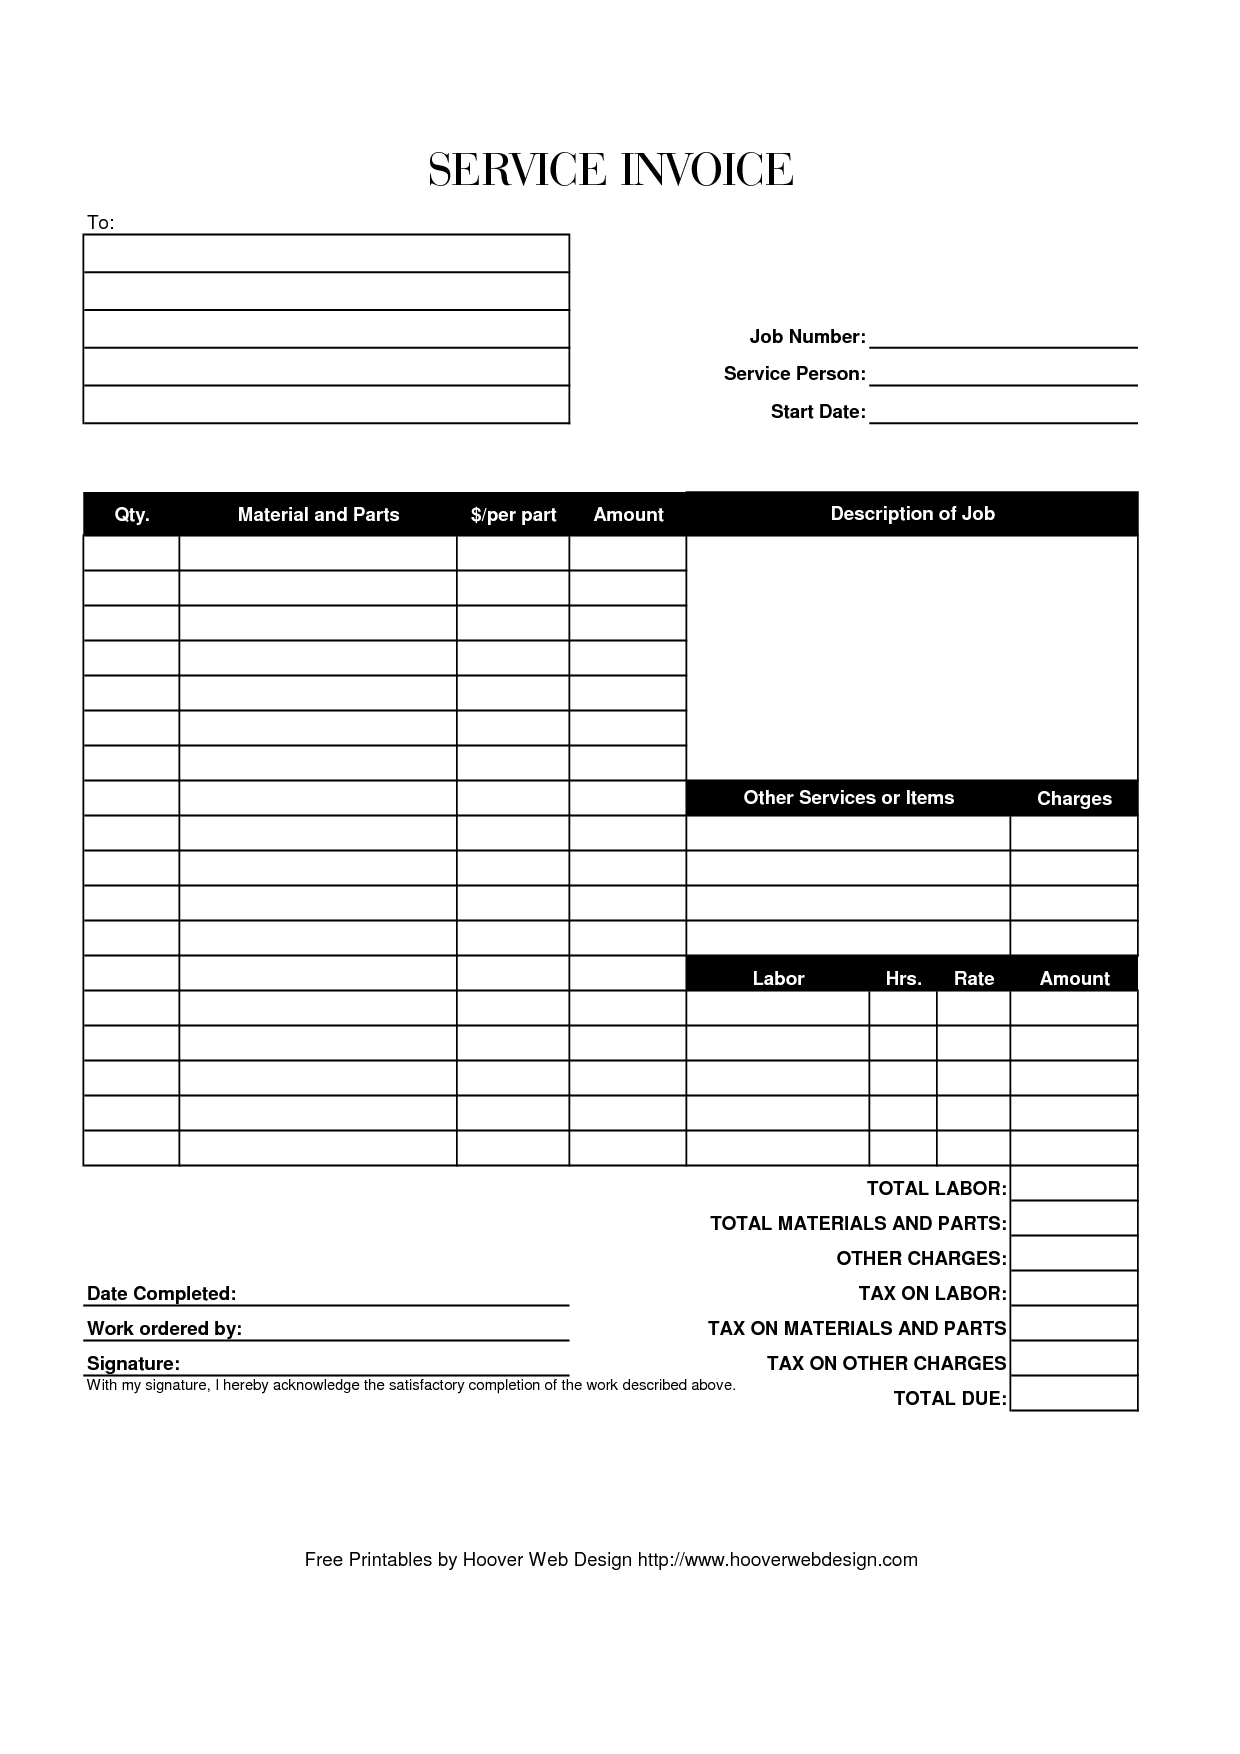 free-printable-service-invoices-invoice-template-ideas